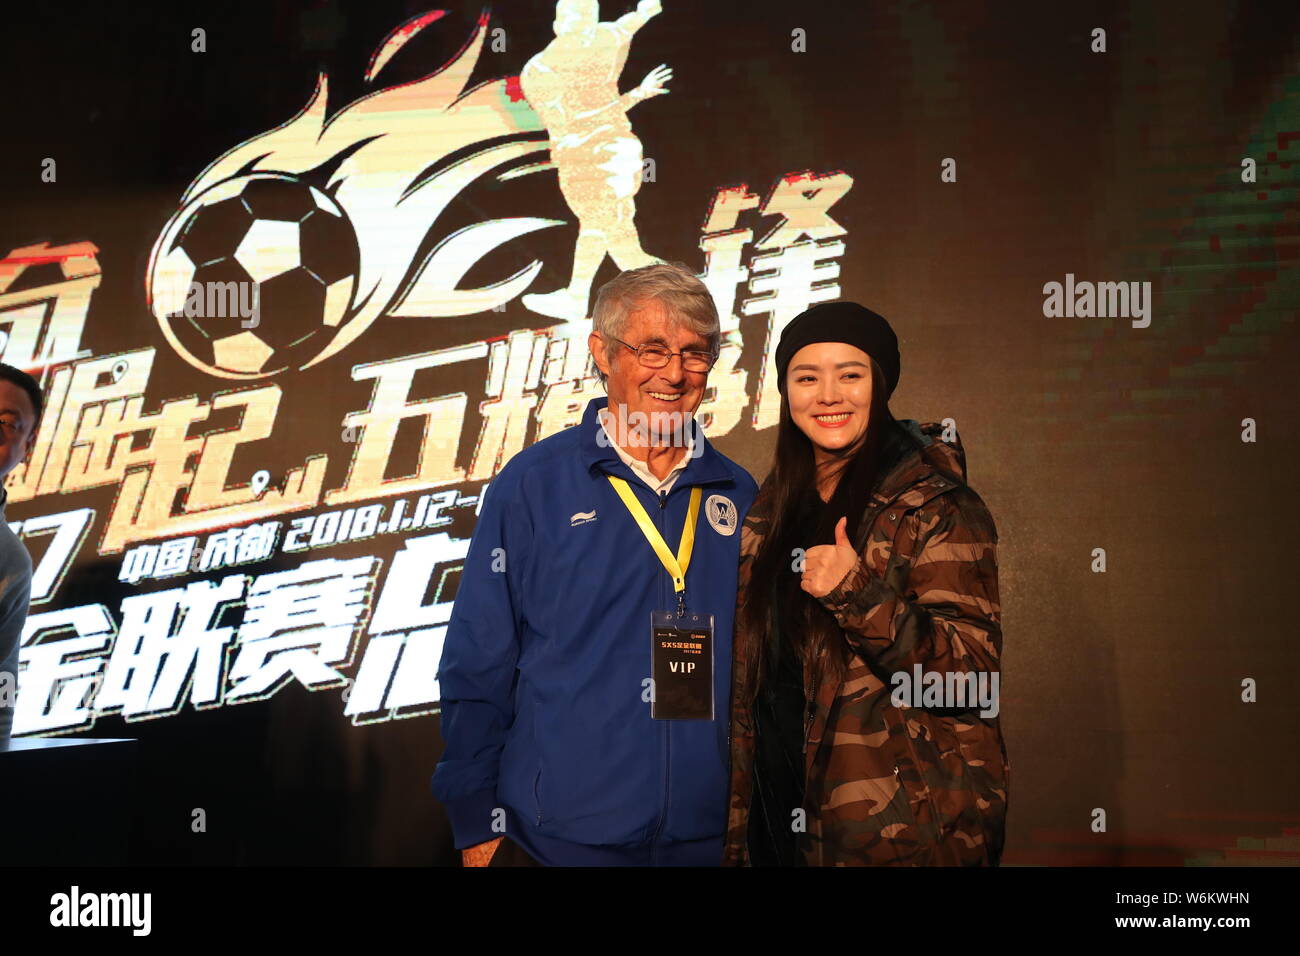 Serbian football coach and former player Bora Milutinovic, left, attends a press conference of Sina 5v5 Football Golden League Finals in Chengdu city, Stock Photo